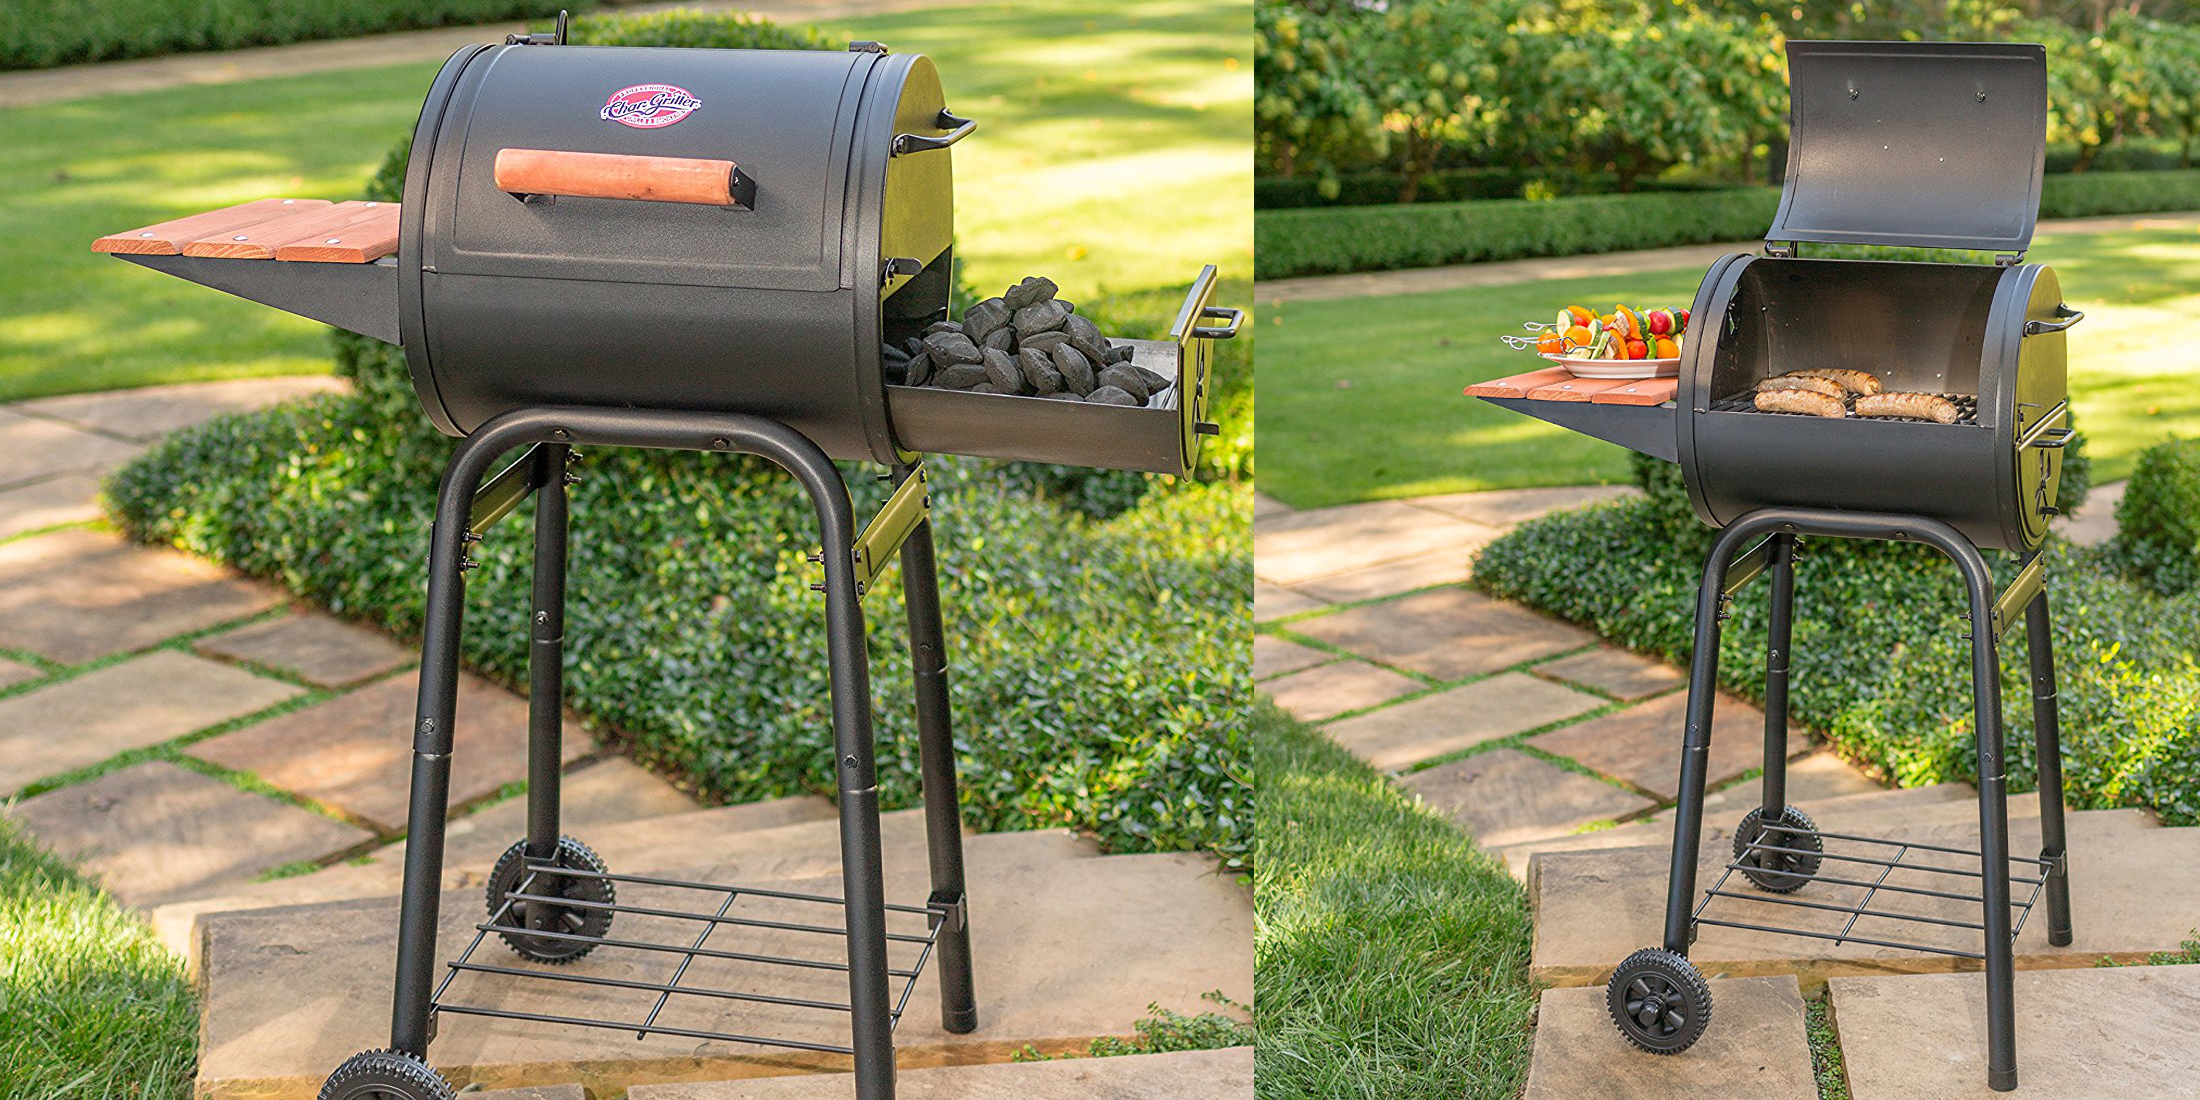 satelliet Recreatie schetsen Char-Griller Patio Pro Charcoal Grill w/ cast iron grates for $63 shipped